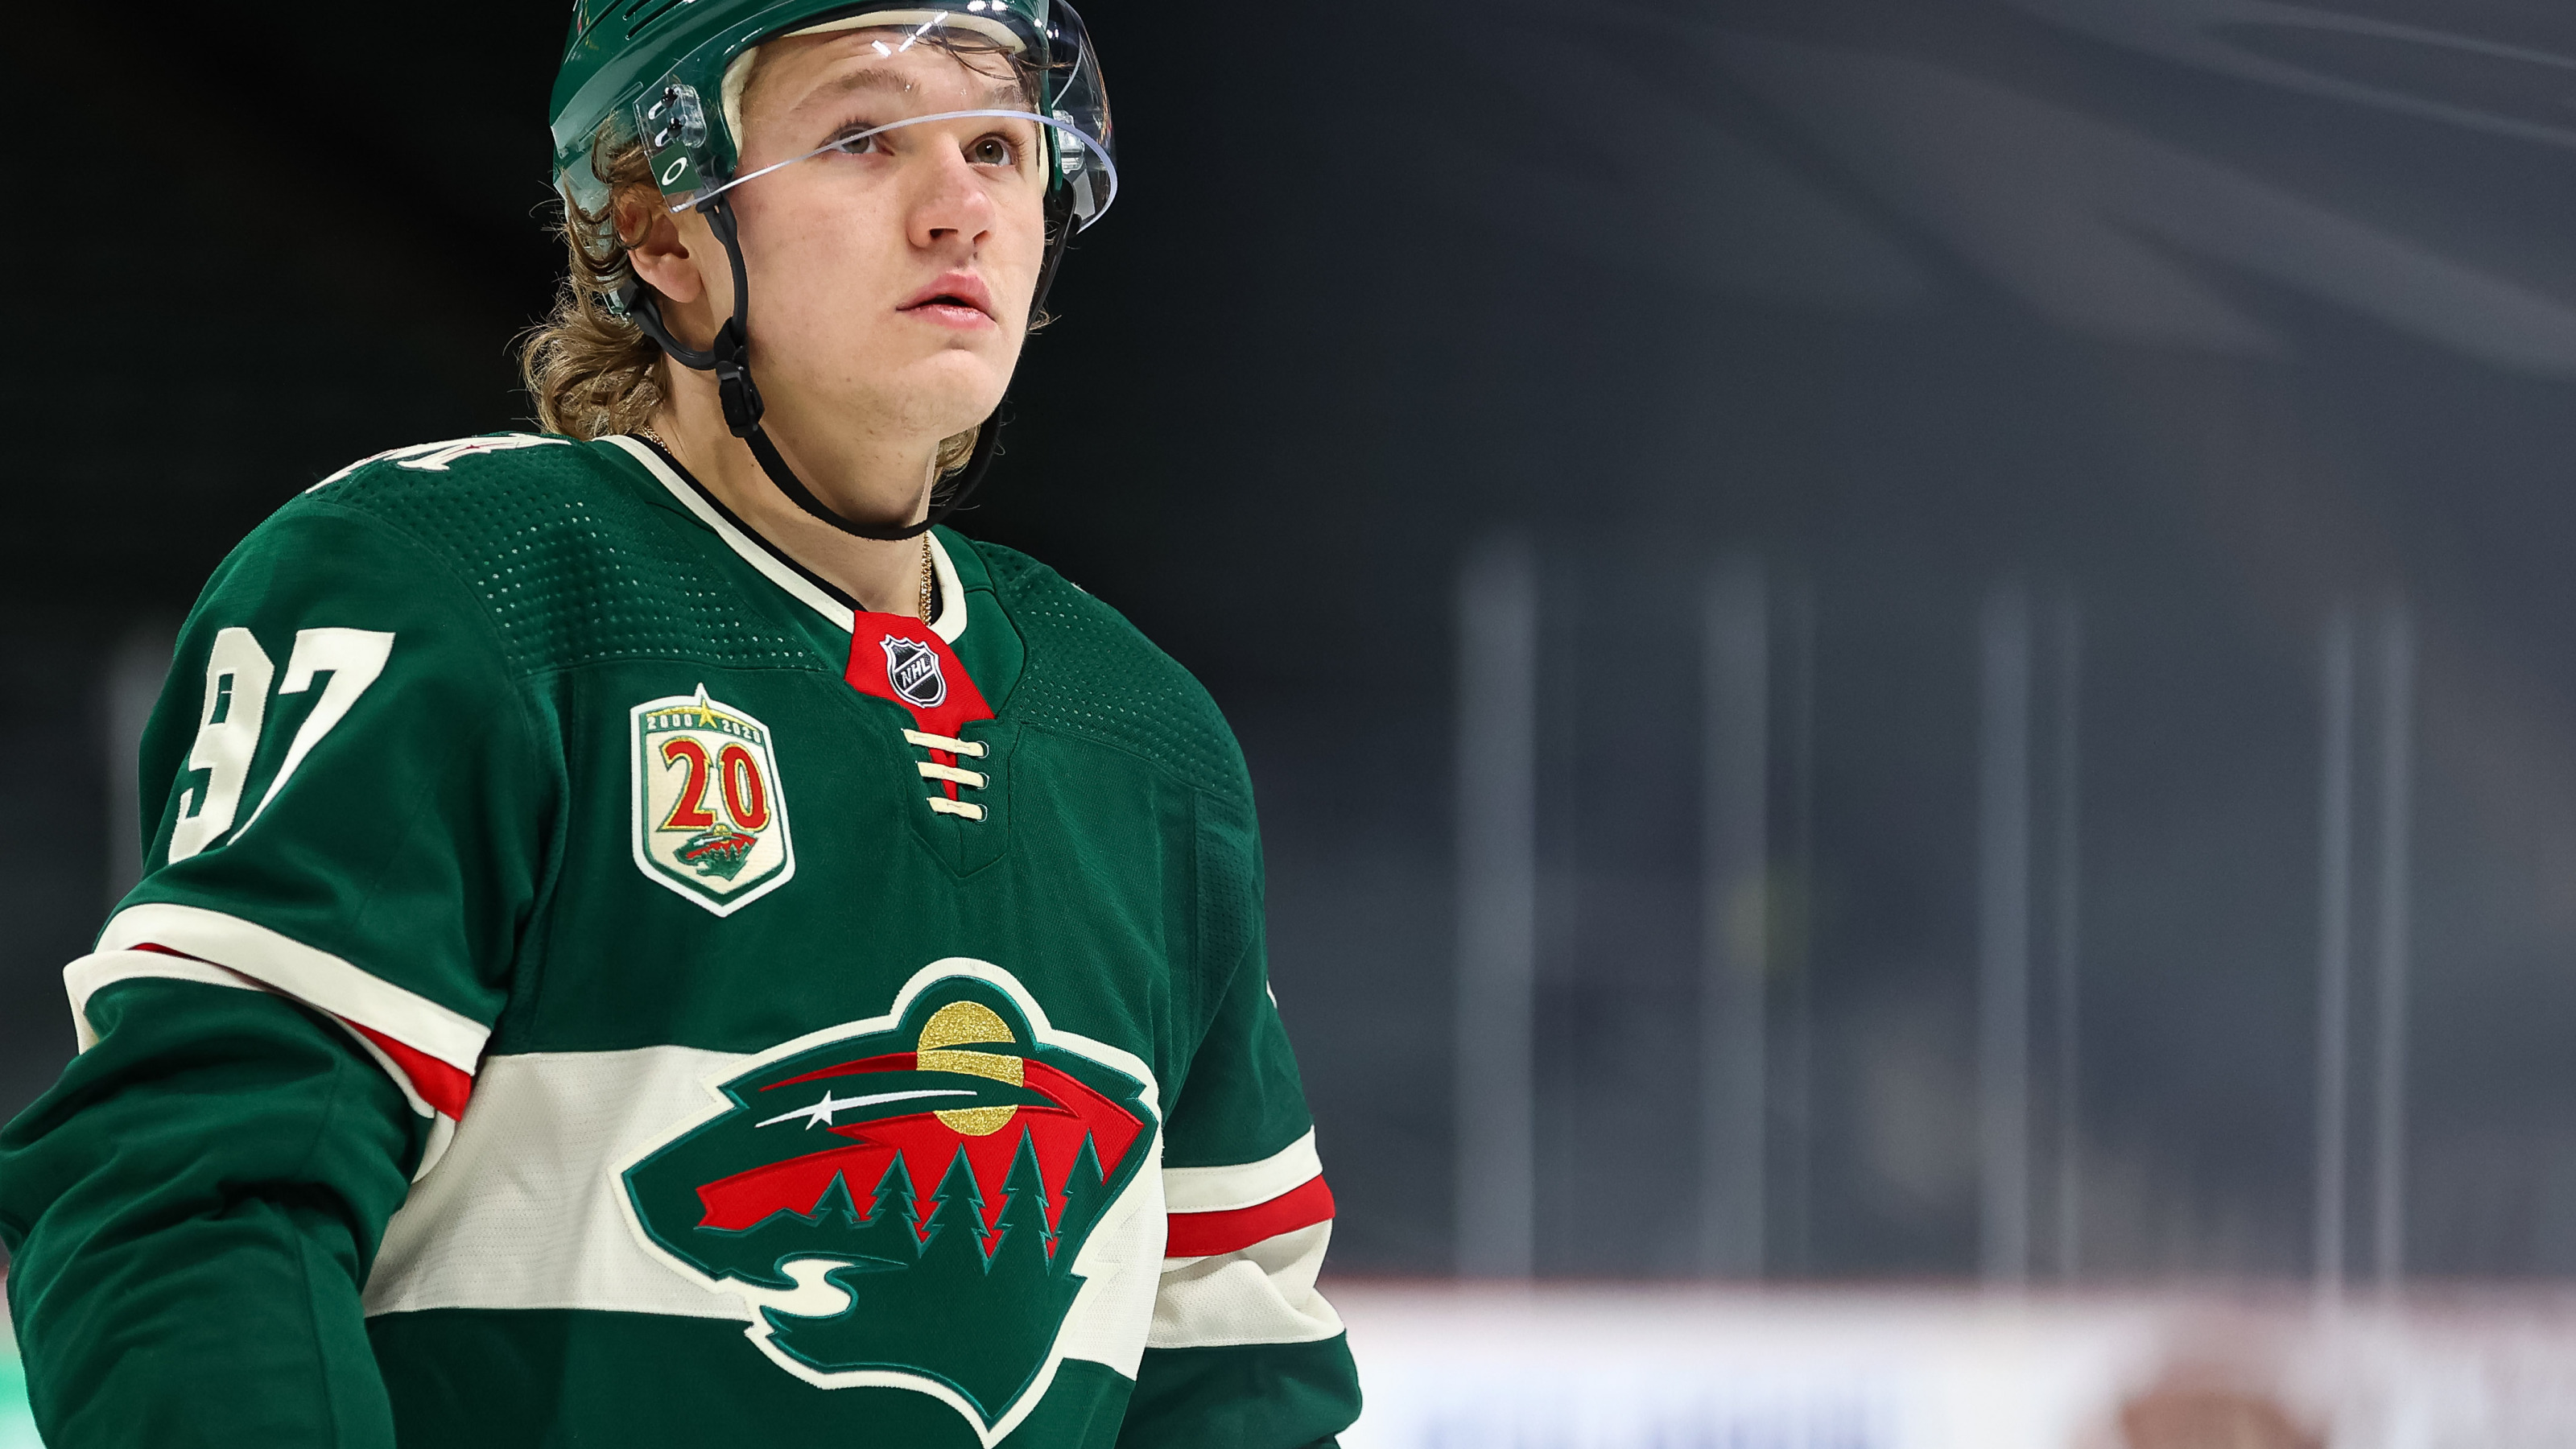 Kirill Kaprizov signs with Minnesota Wild on five-year contract